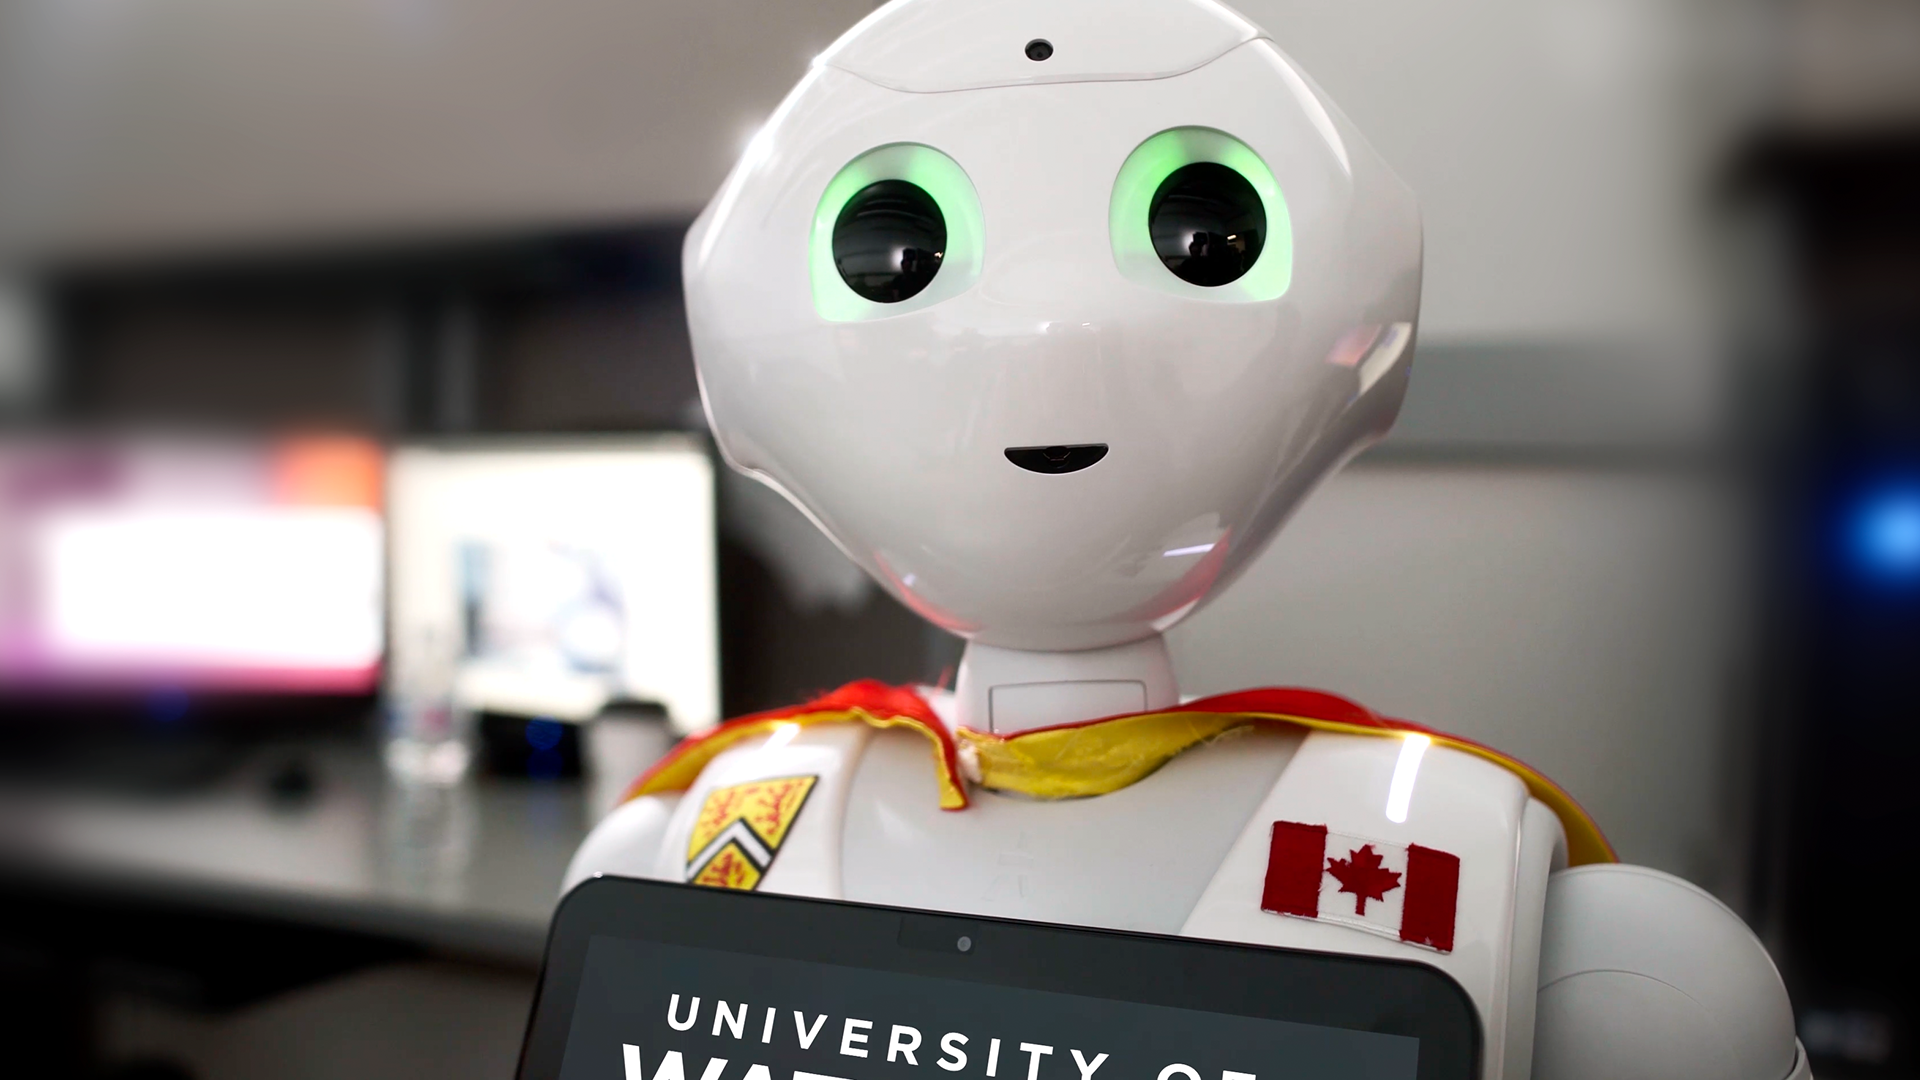 Close-up of the University of Waterloo's Pepper robot